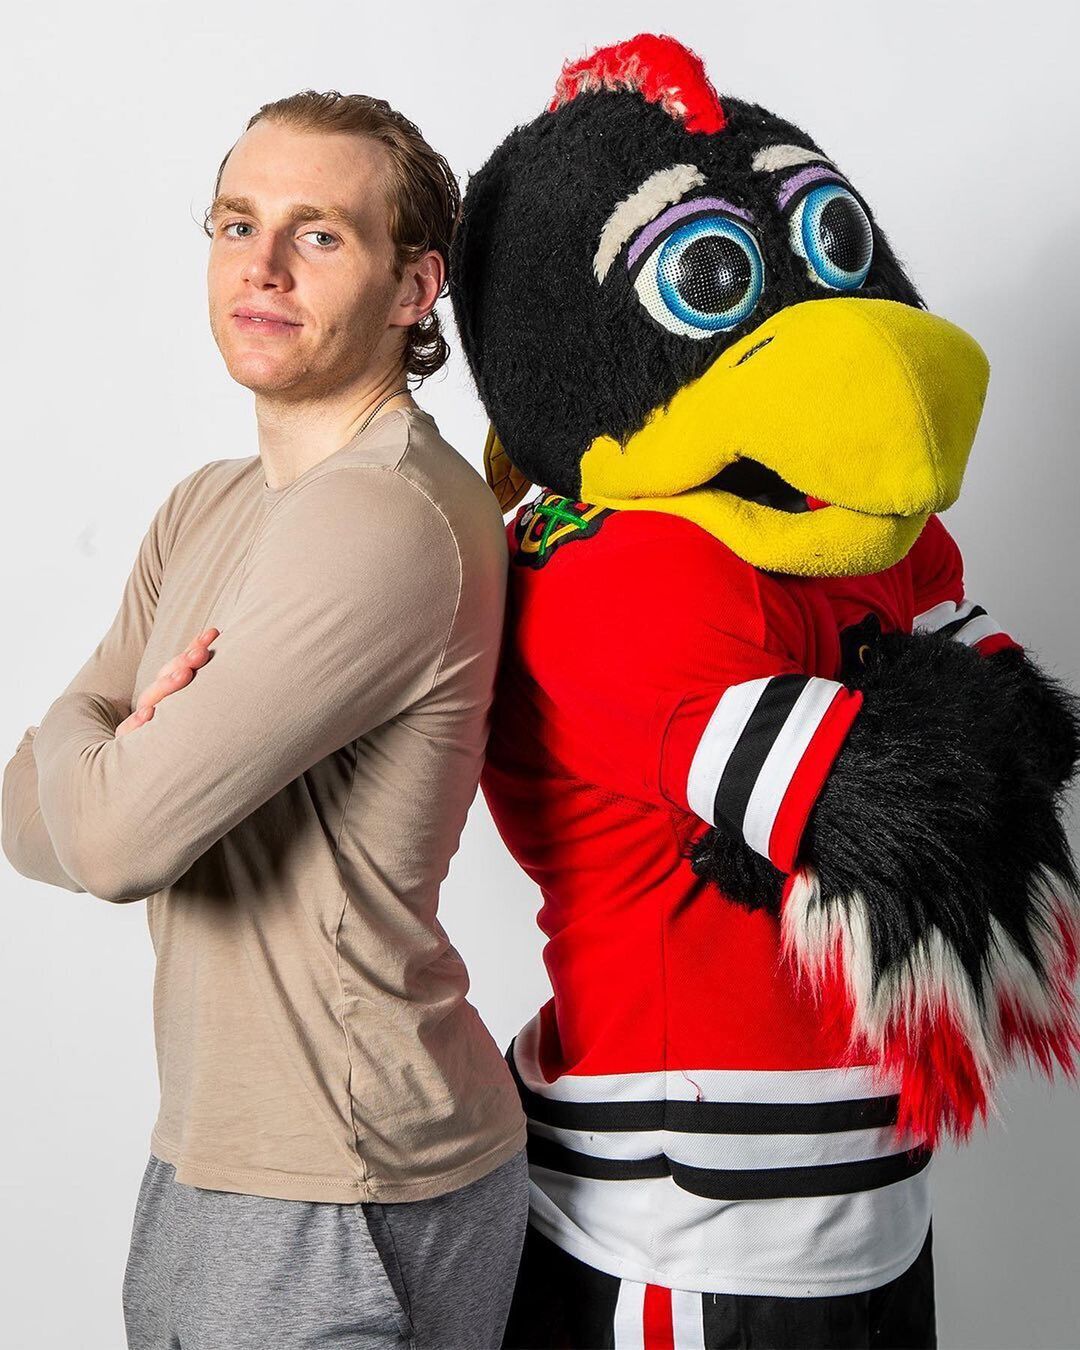 Your fave could never. Happy #NationalMascotDay to the best bird in the biz...